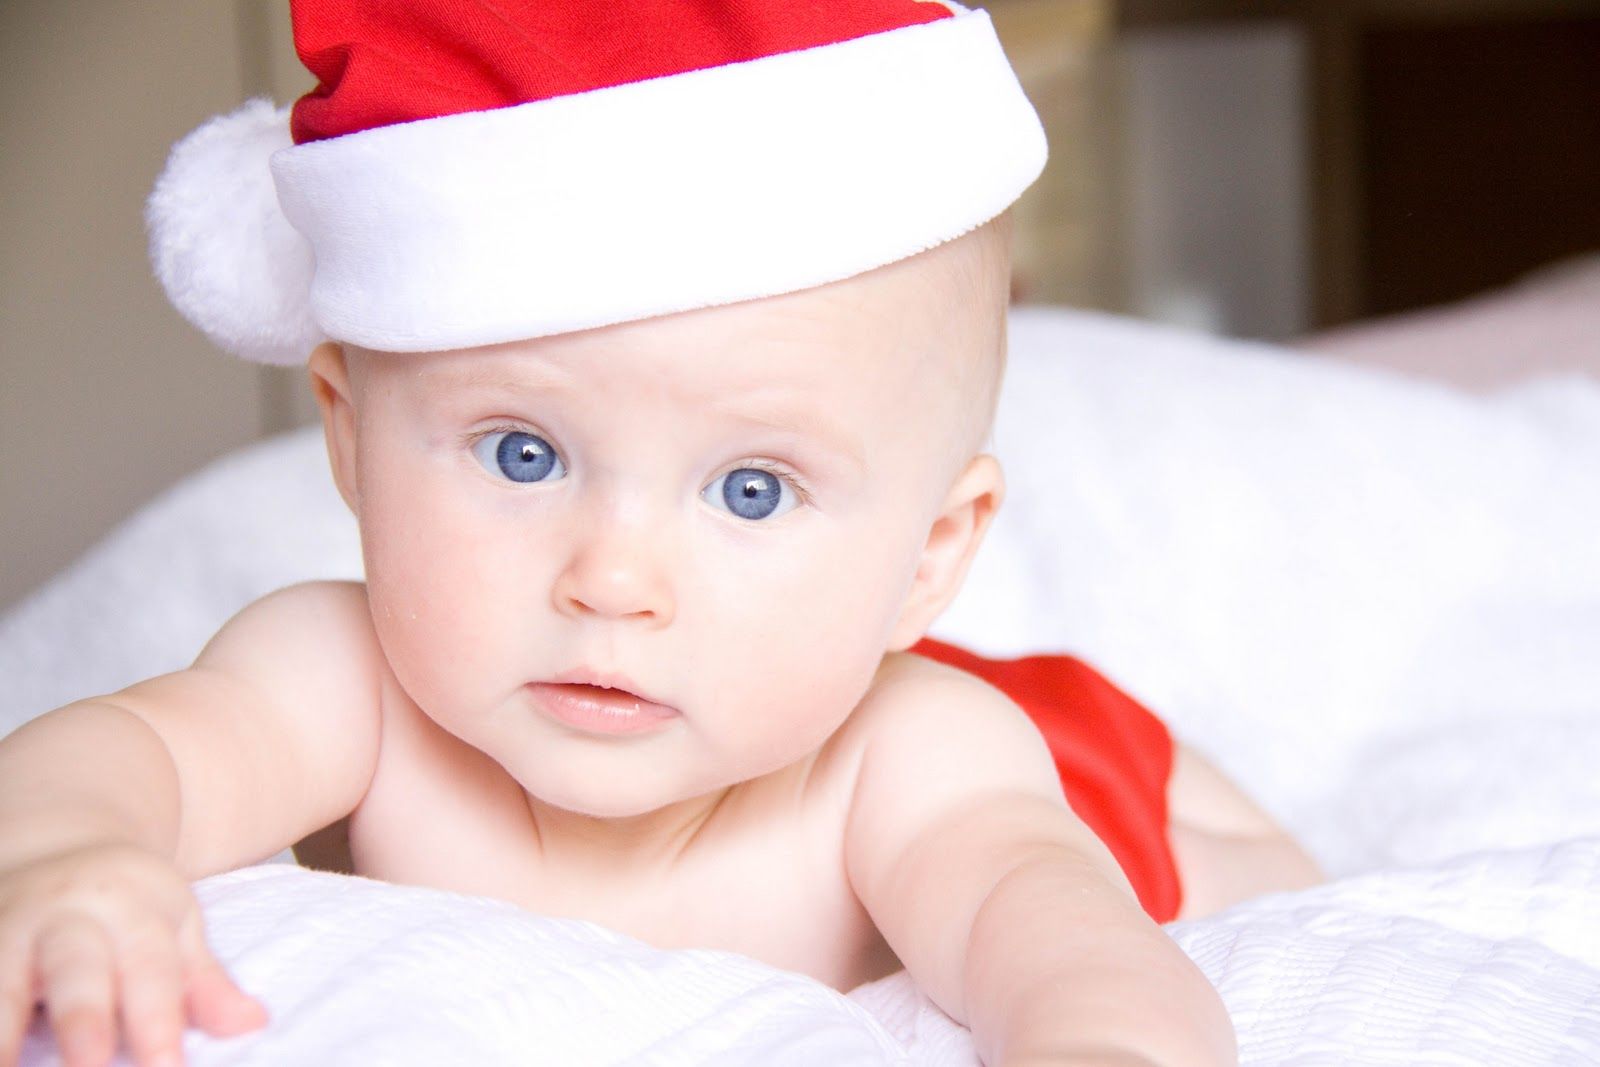 Get Cute Baby Child Wallpaper Wide Mln At Movingwallpaper